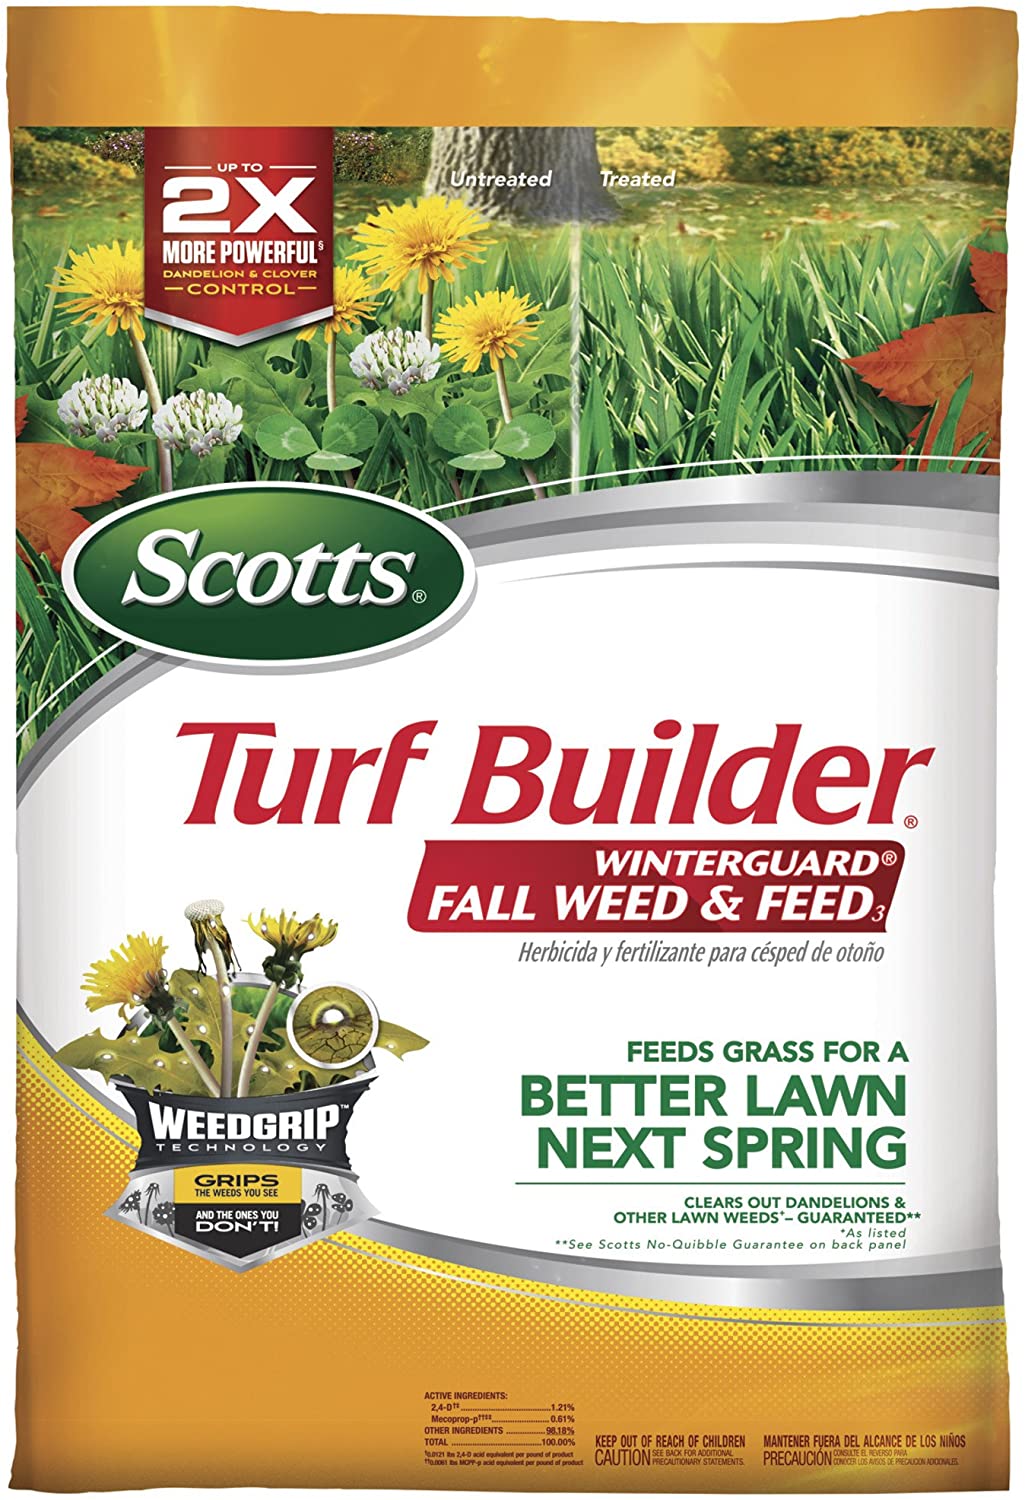 43-Lb Scotts Turf Builder Winterguard Fall Weed & Feed (15,000 Sq. Ft. Coverage) $40 + Free Shipping